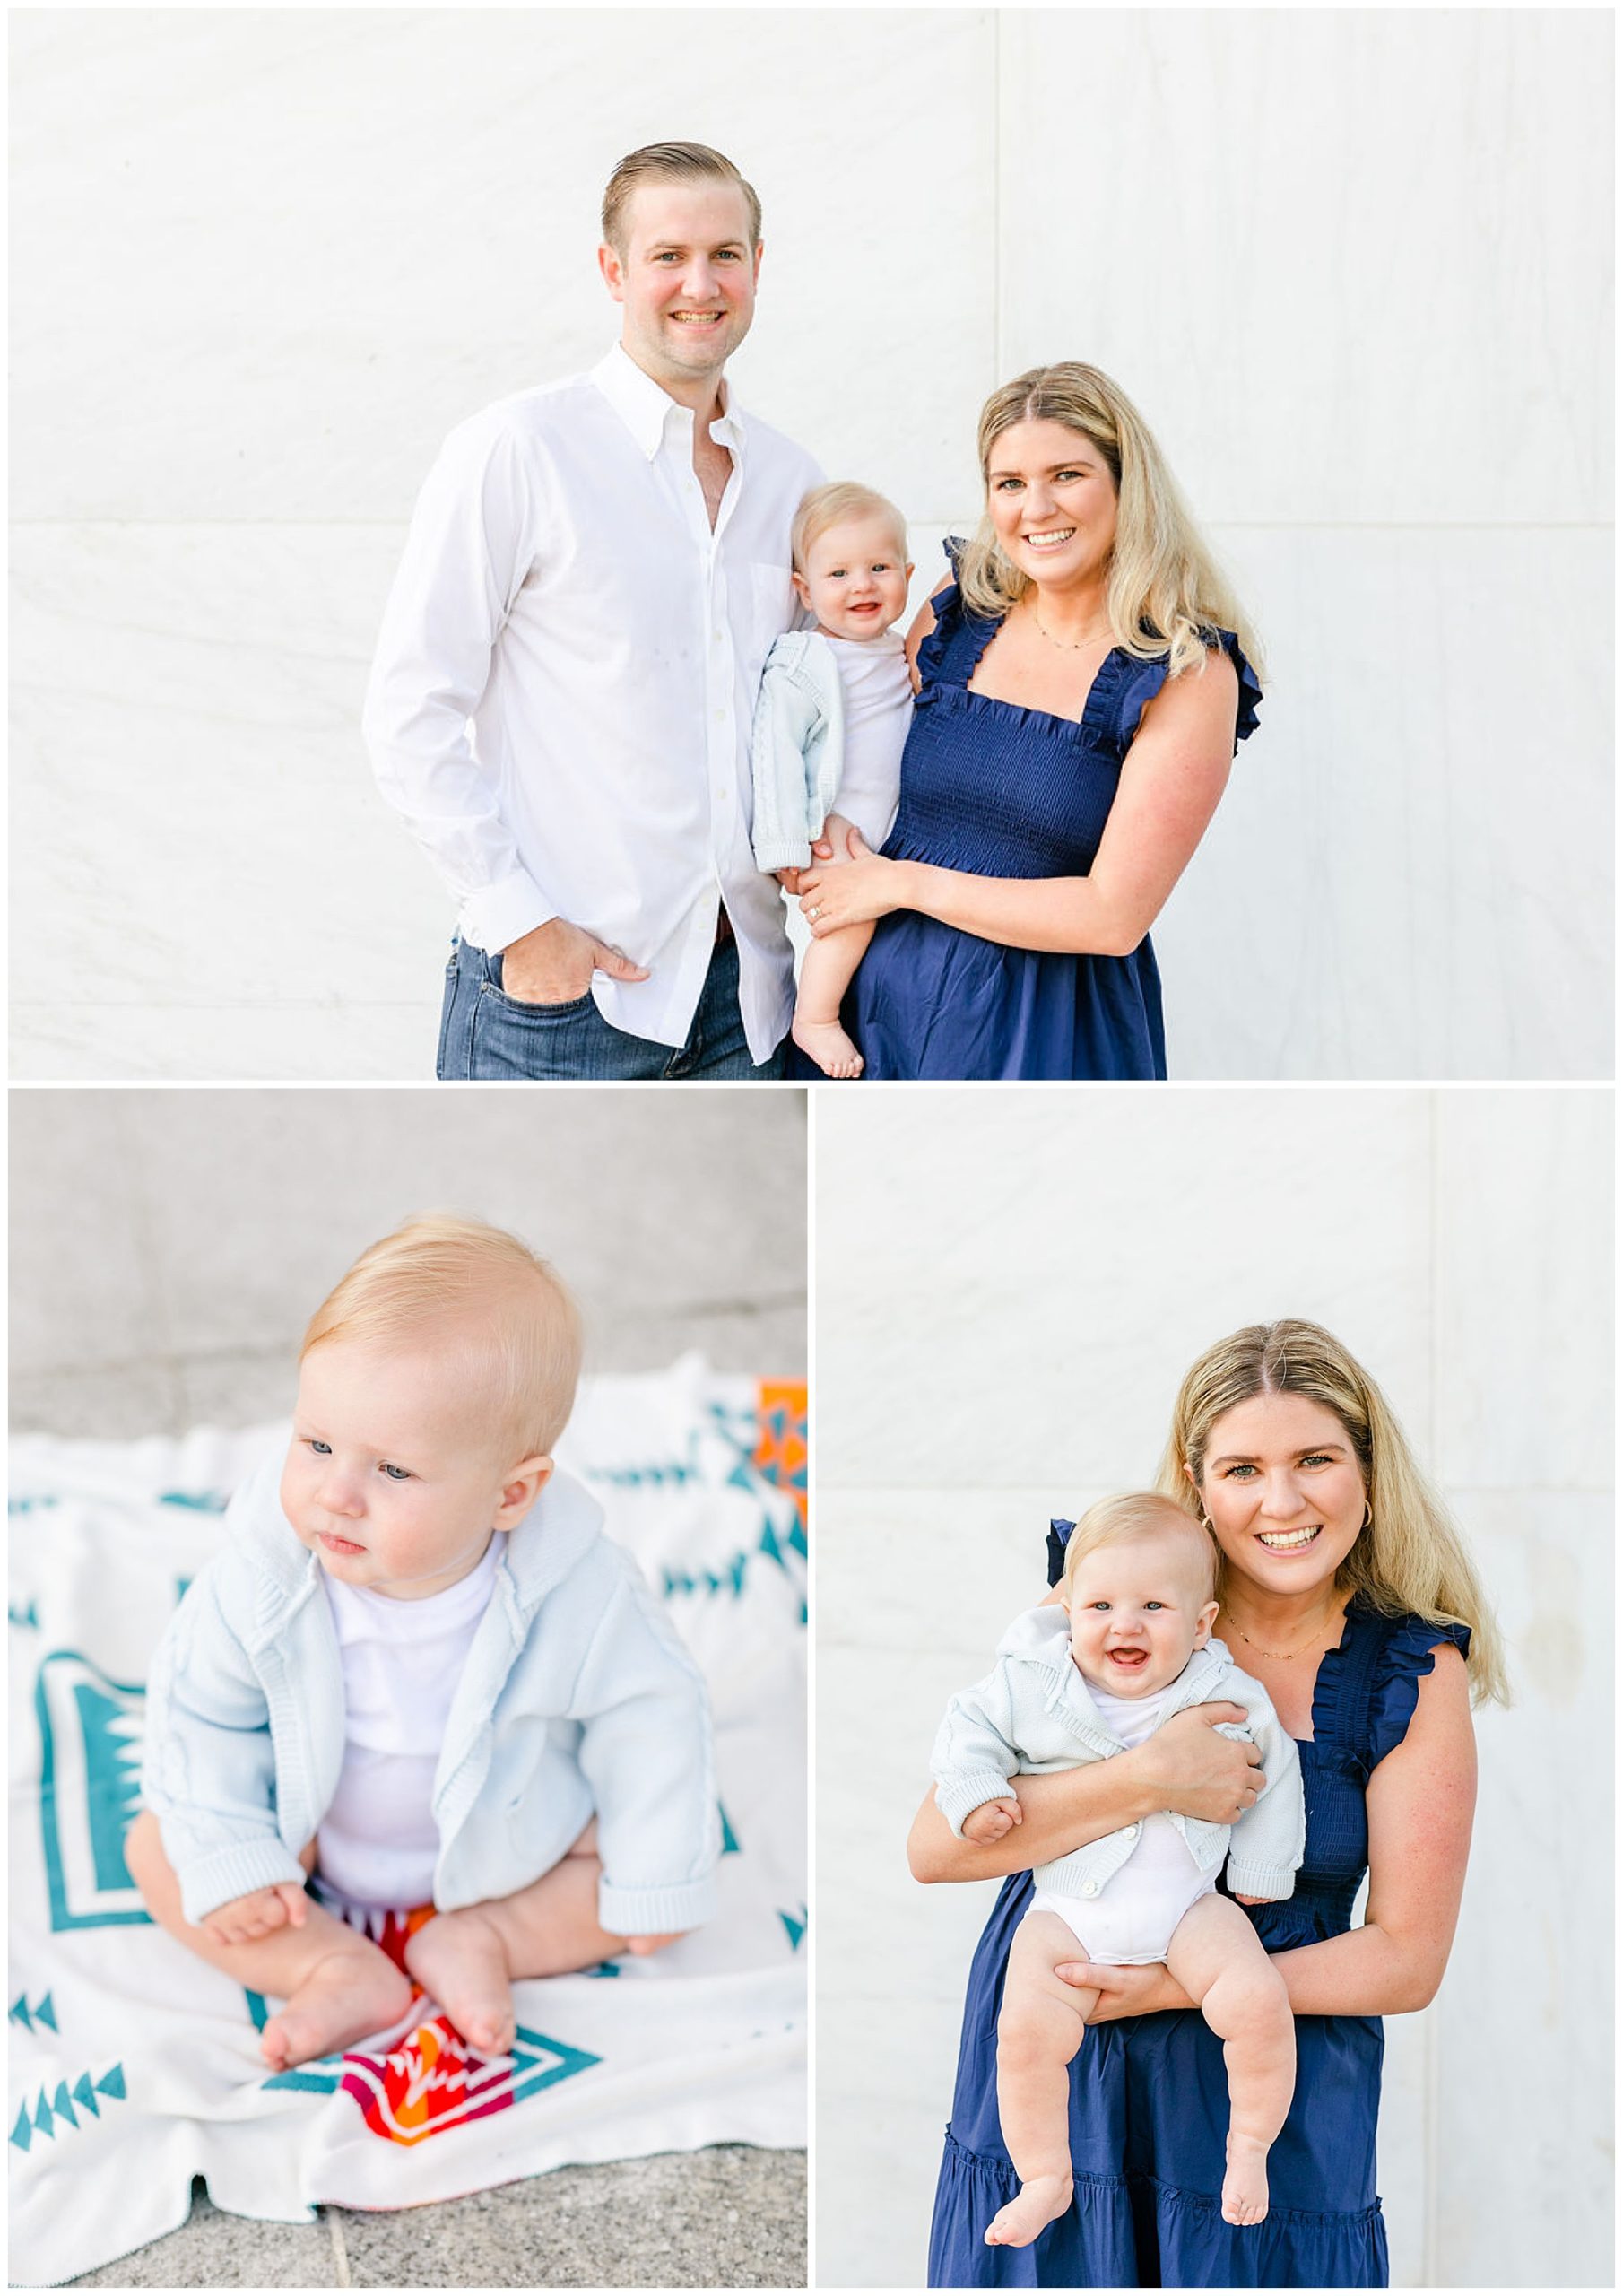 Kennedy Center family portraits, DC family portraits, classic DC family photos, casual family portraits, spring family portraits, Kennedy Center portraits, family of three, couple with baby, Rachel E.H. Photography, baby sitting on blanket, mom holding baby, baby smiling